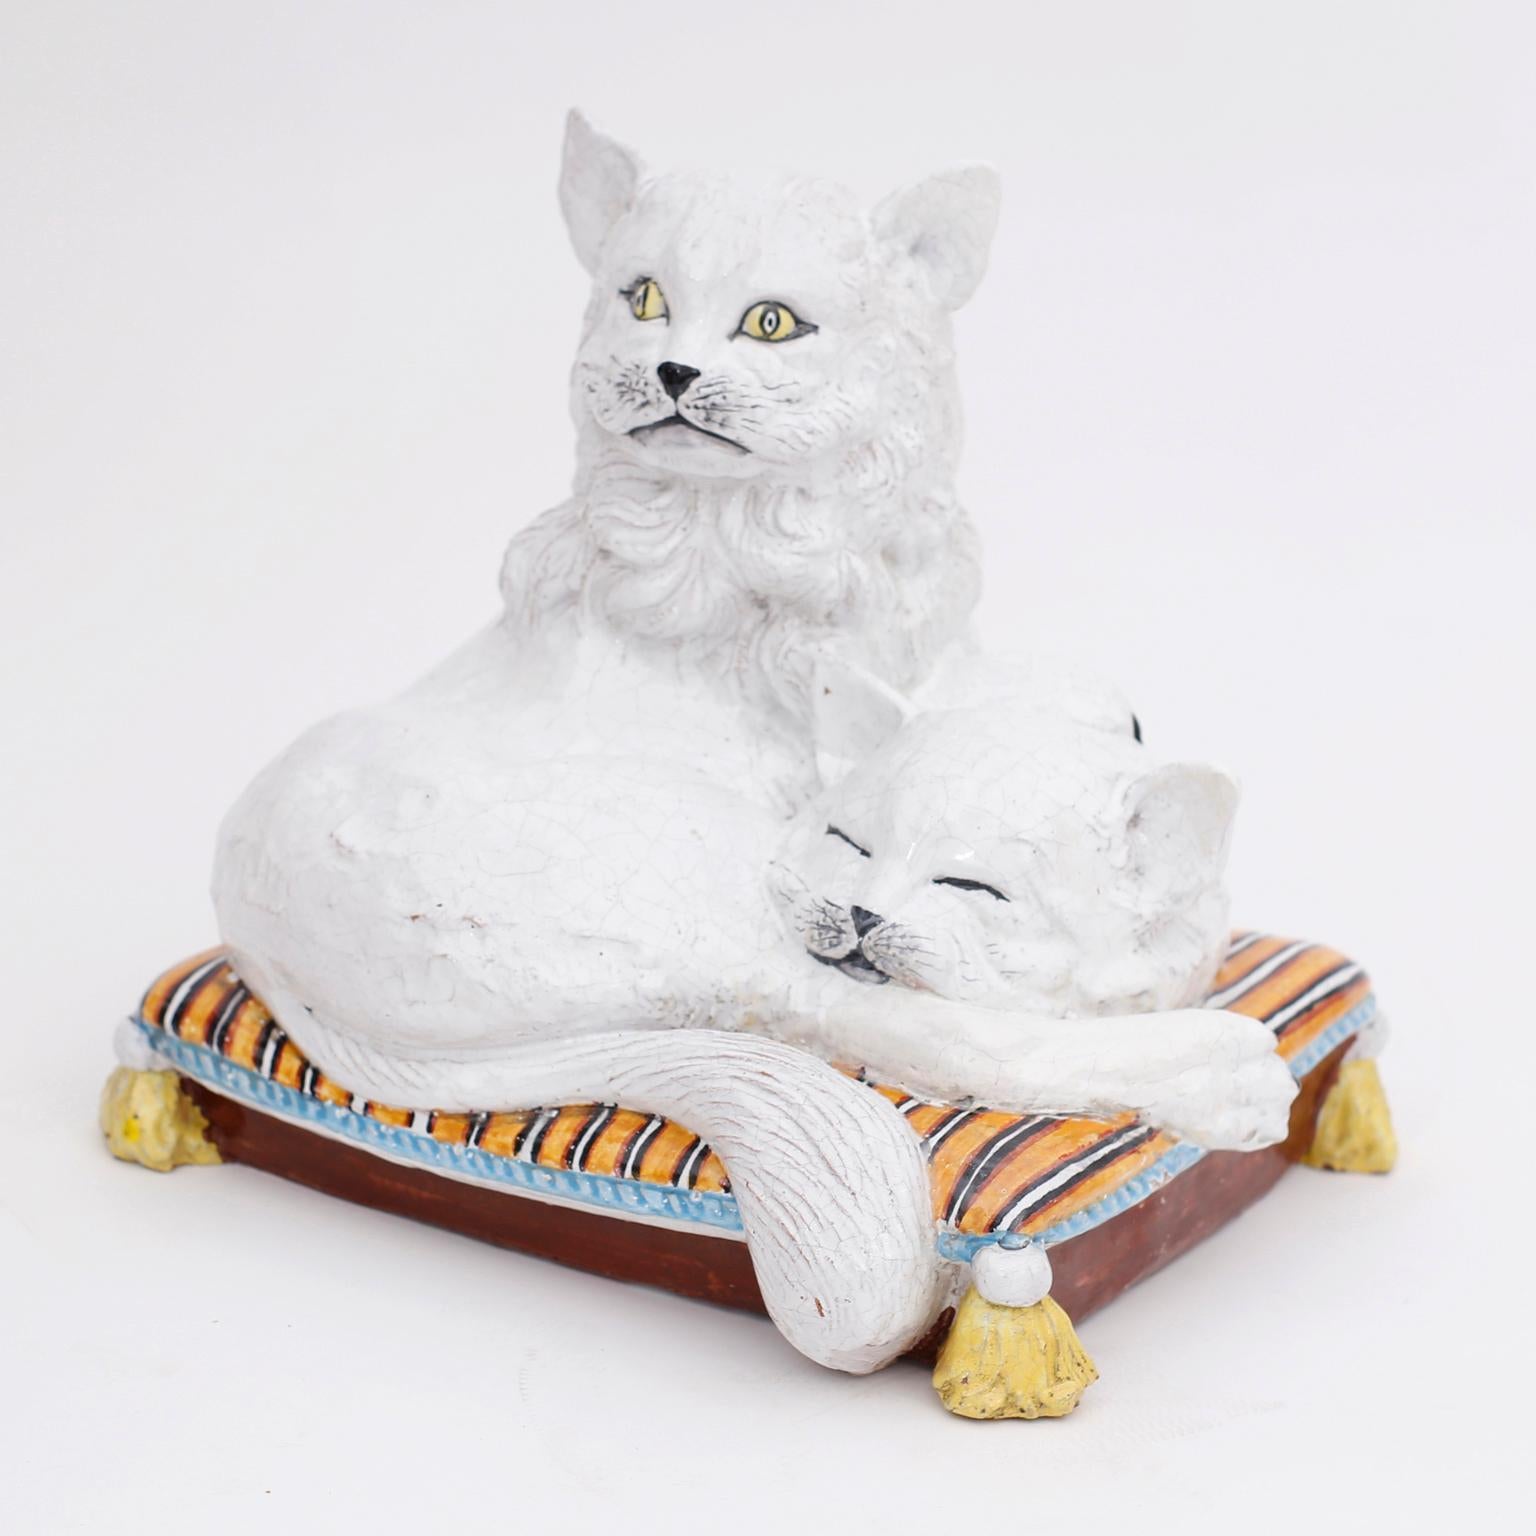 Charming Italian crackle glazed terracotta sculpture of two white cats on a striped pillow with tassels.